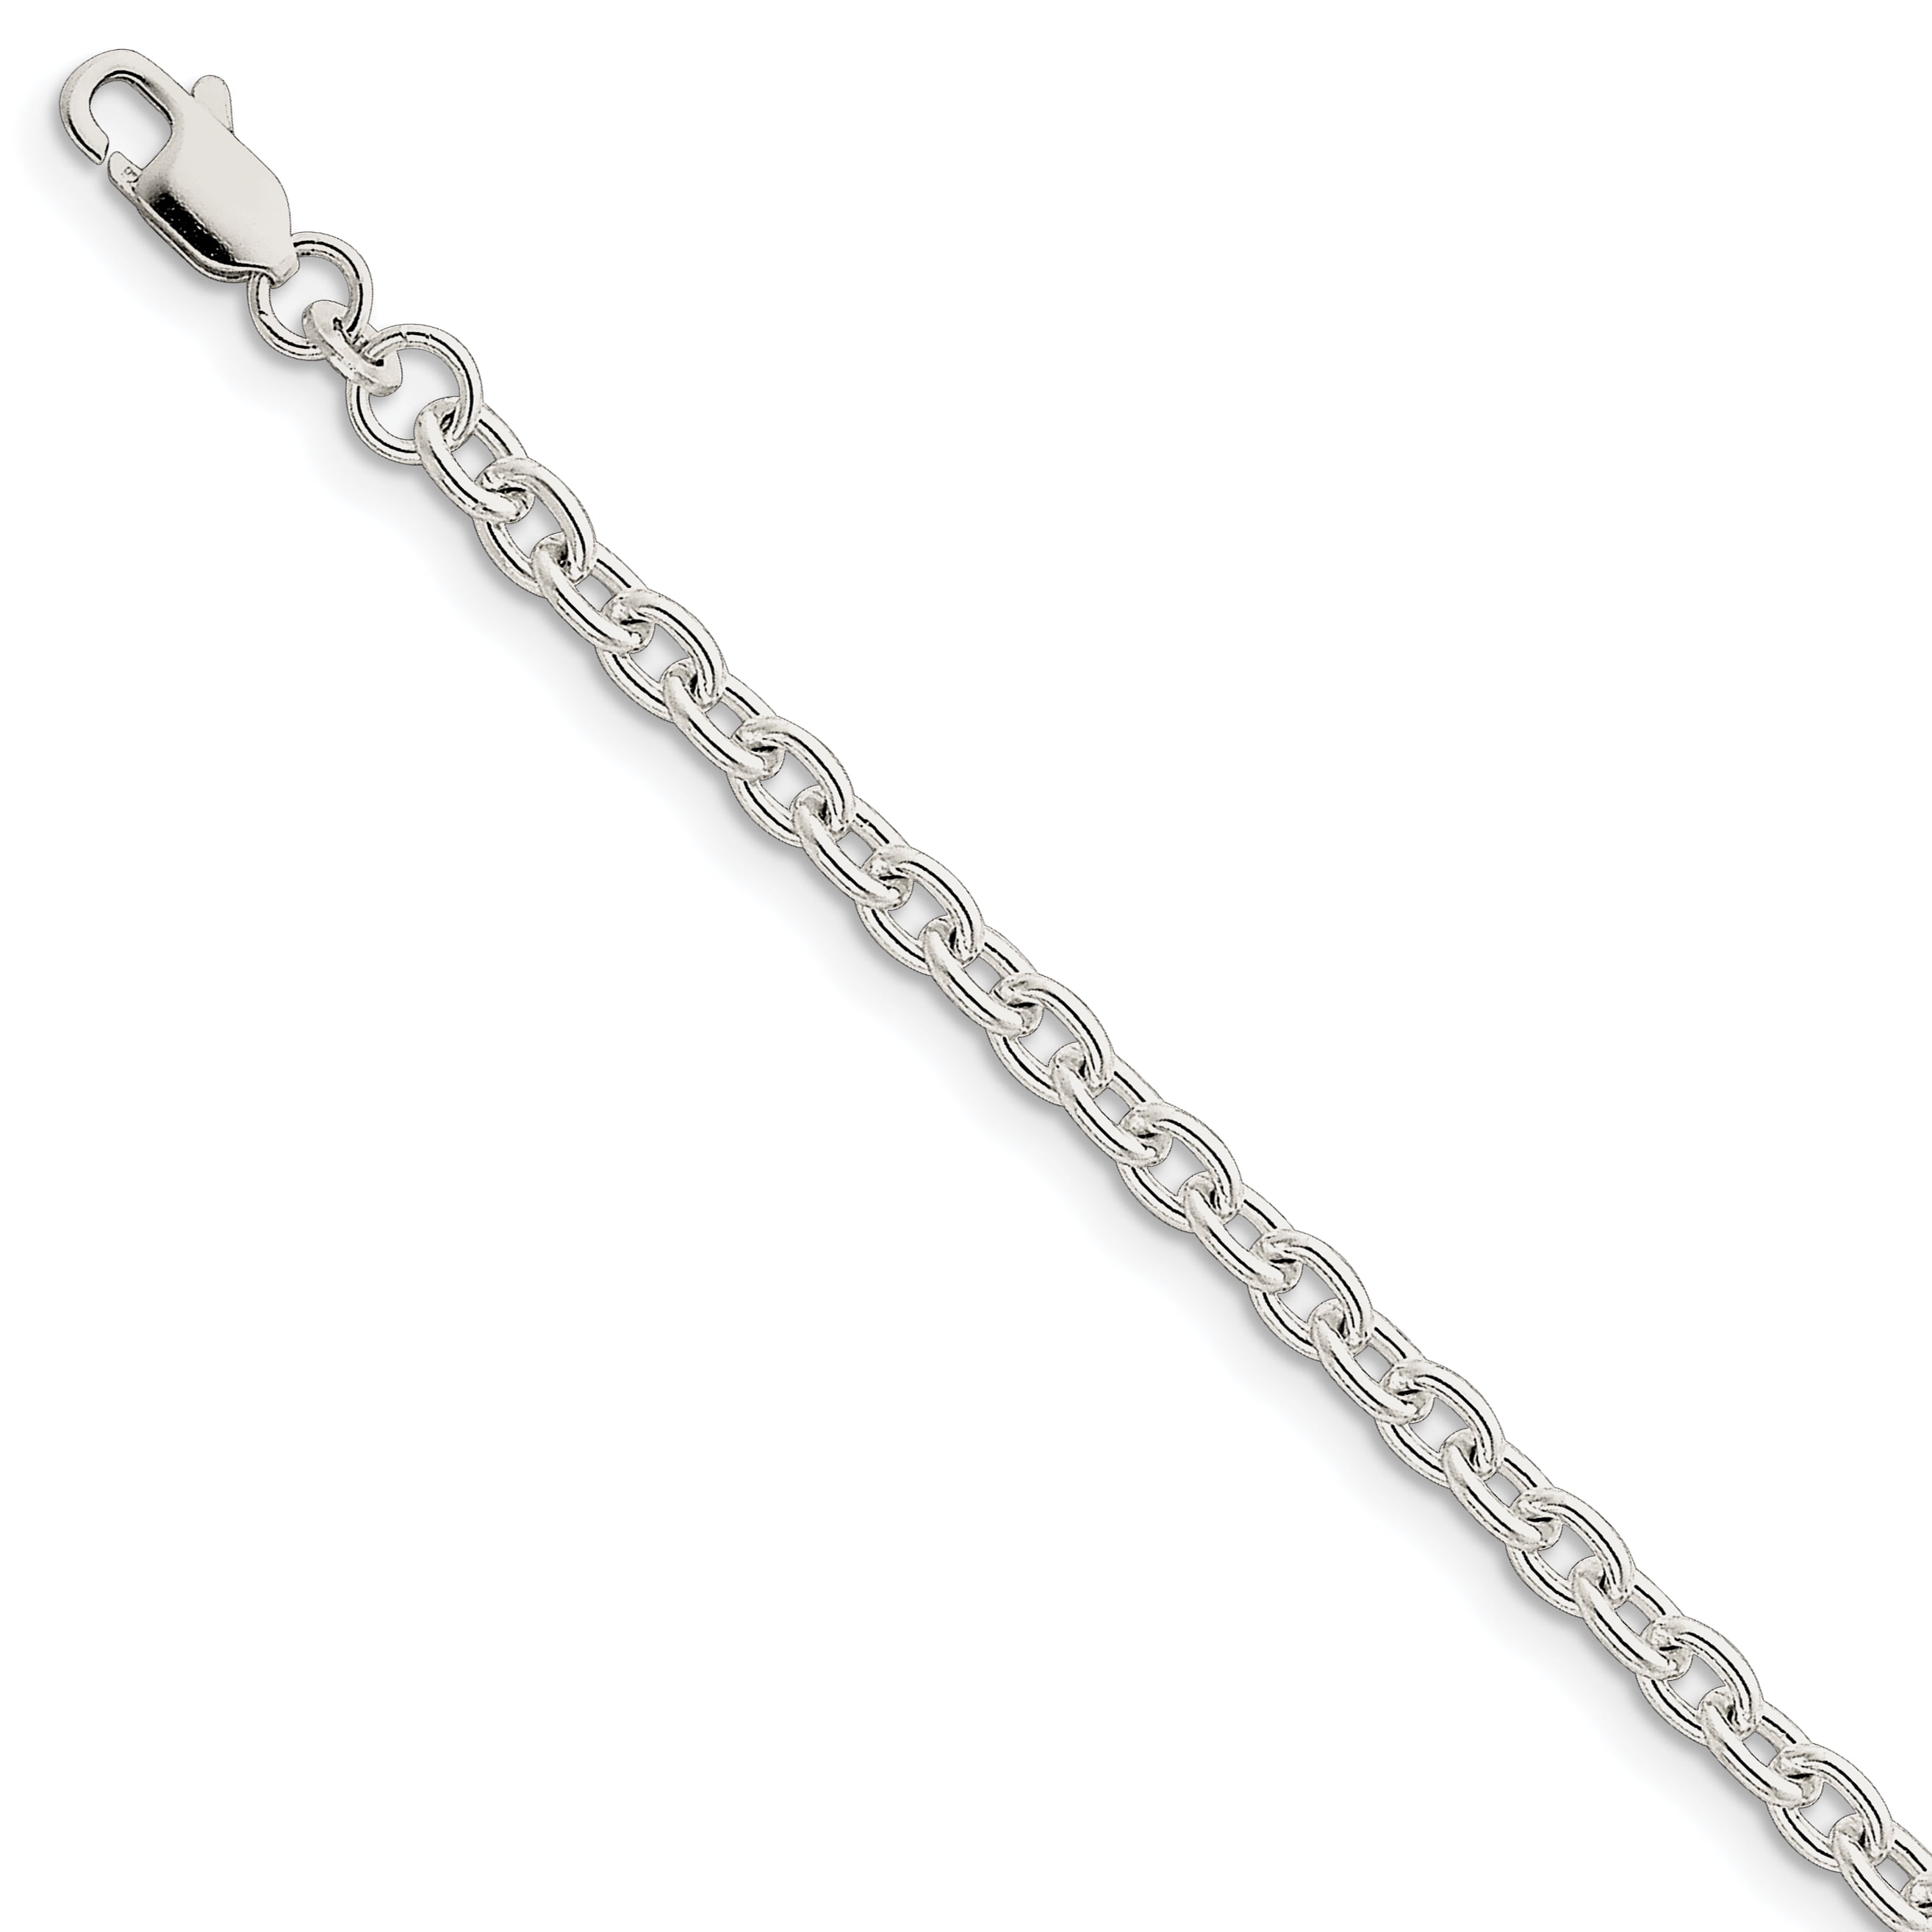 Brilliant Bijou Stainless Steel IP Gold-Plated 2.0mm Ball Chain Necklace